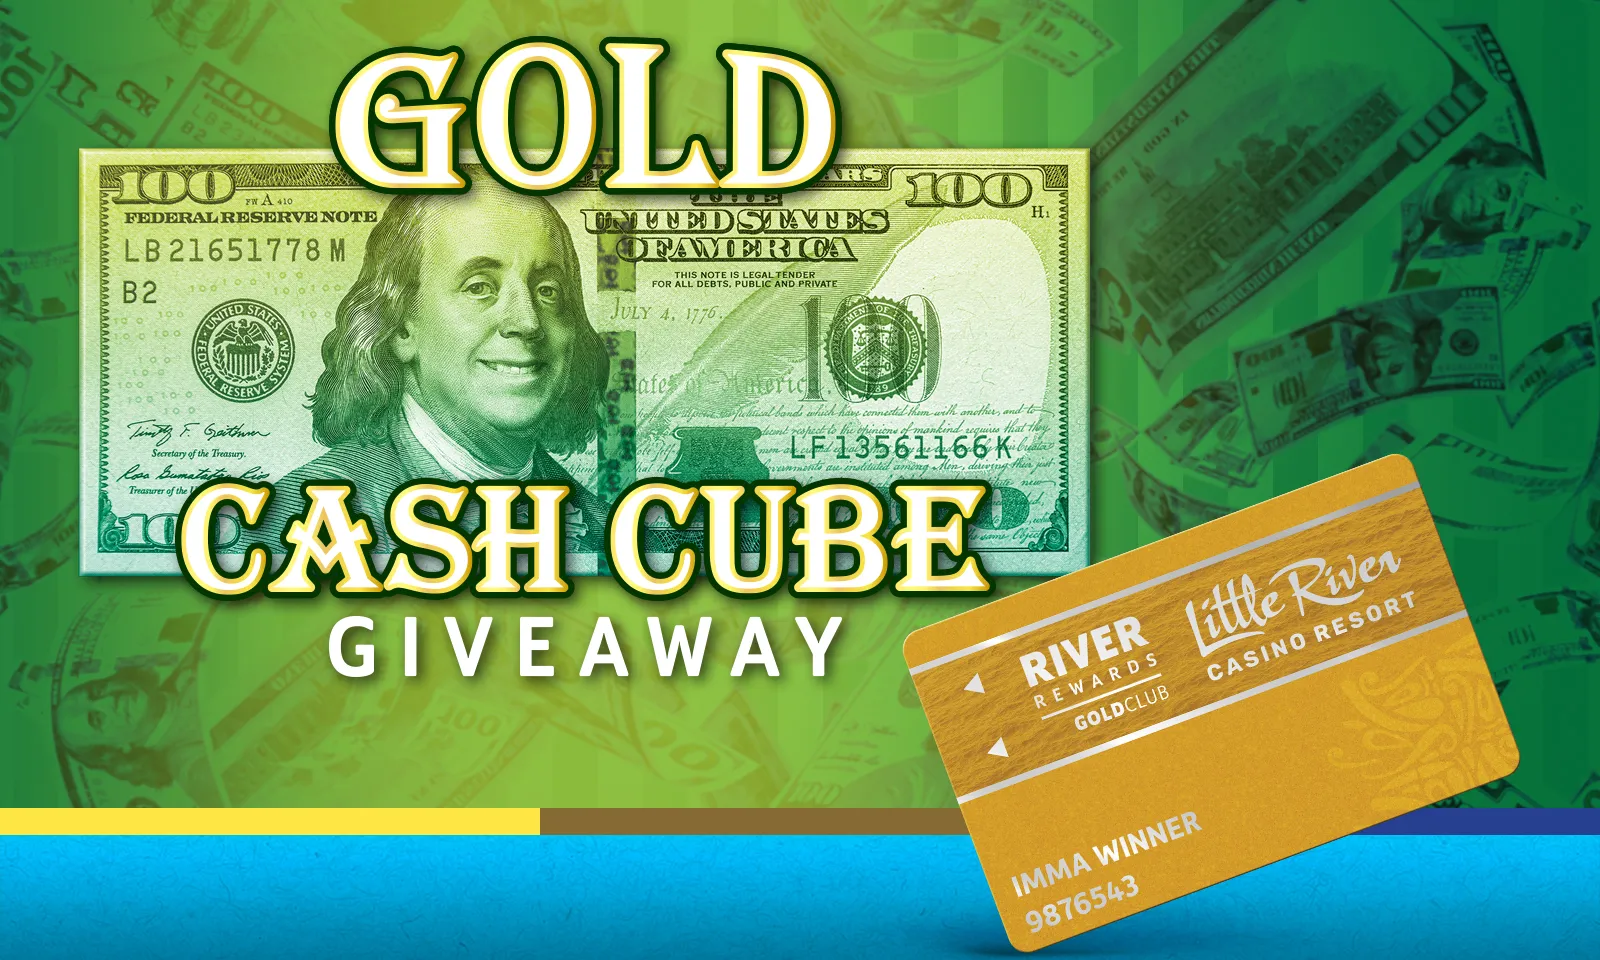 hero gold cash cube giveaway